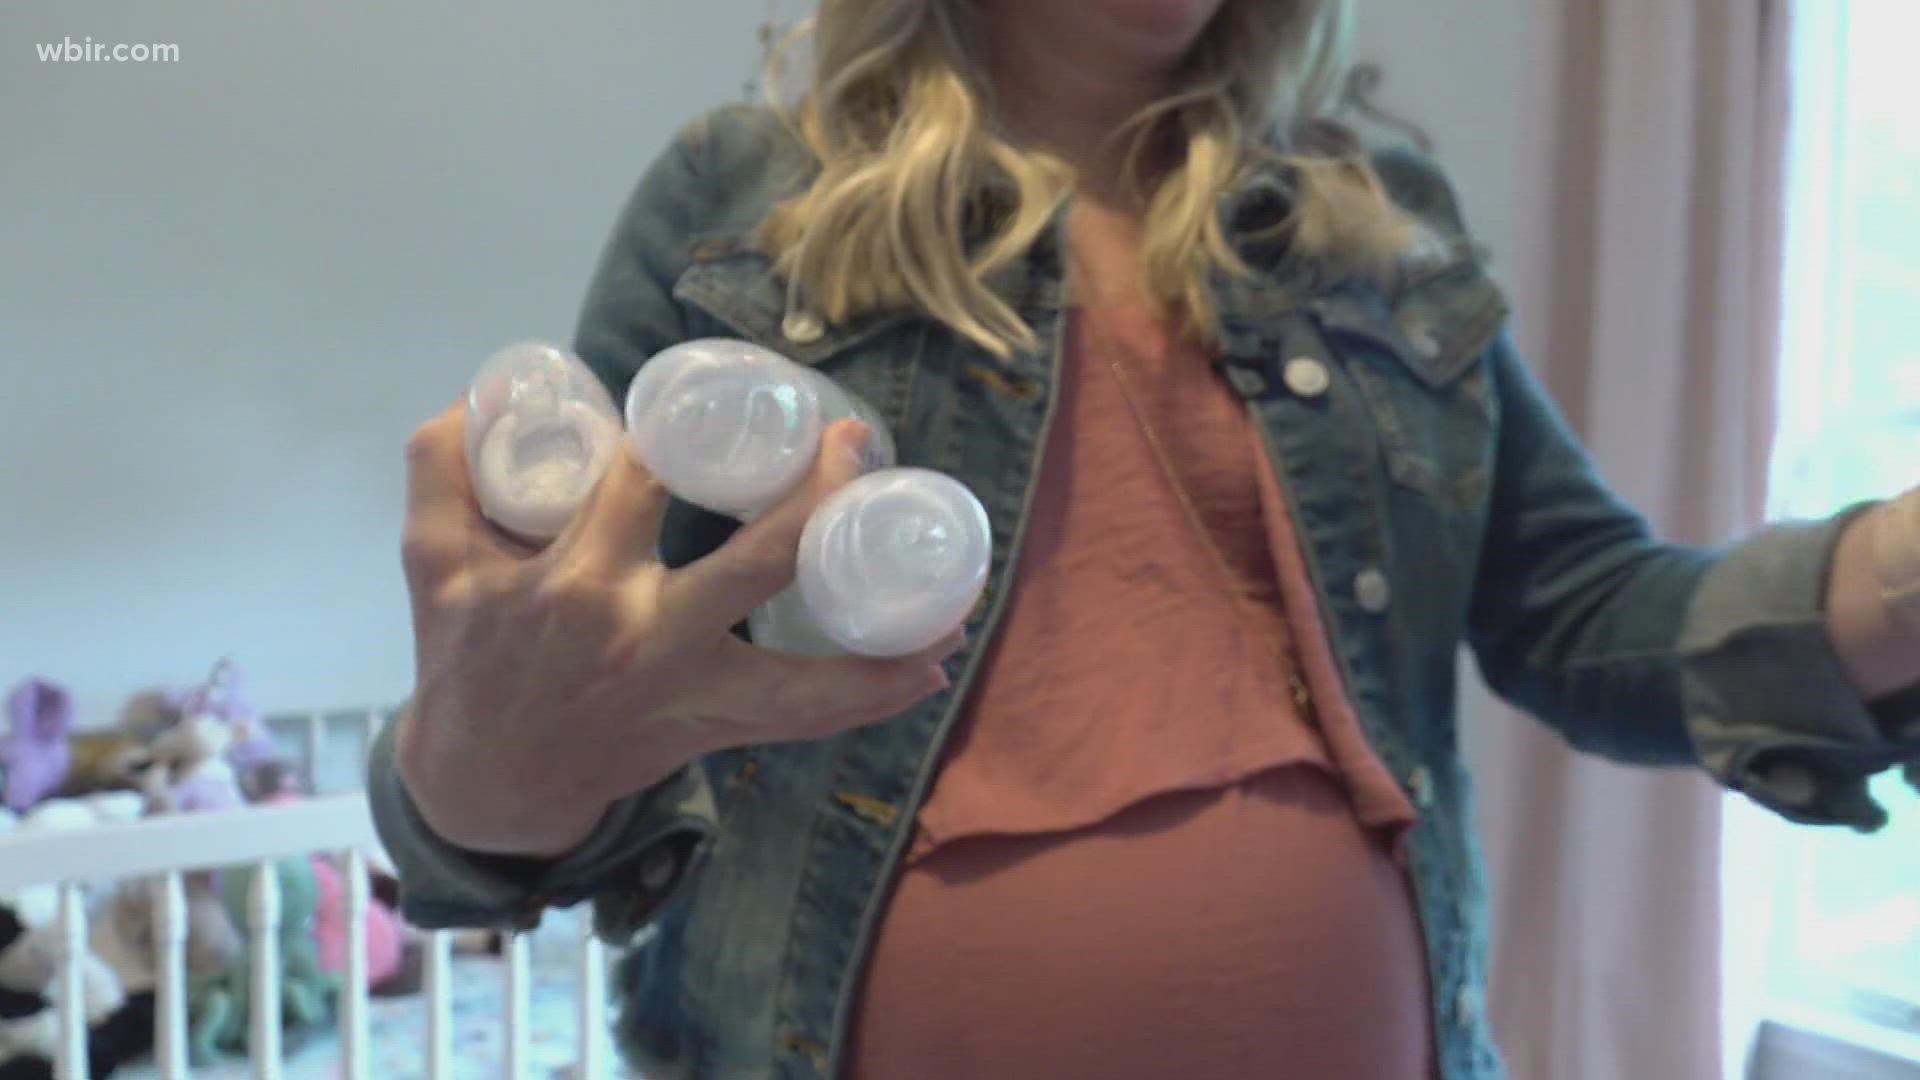 Lactation doctors said sharing breast milk isn't a new concept, but it can come with risks.